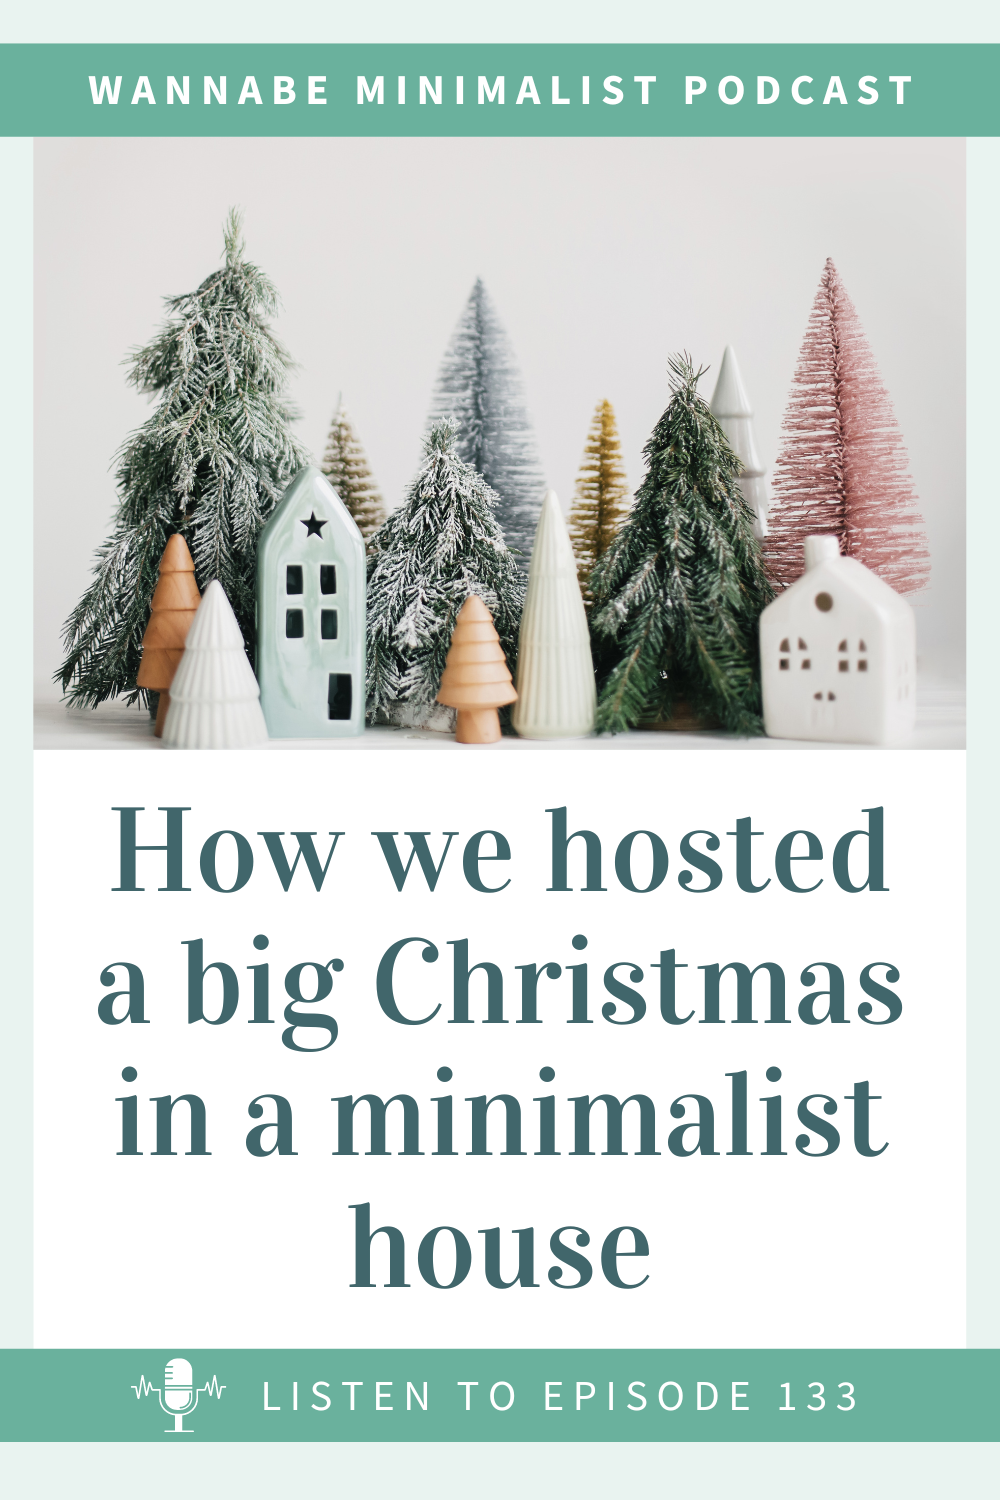 How we hosted a big Christmas in a minimalist house